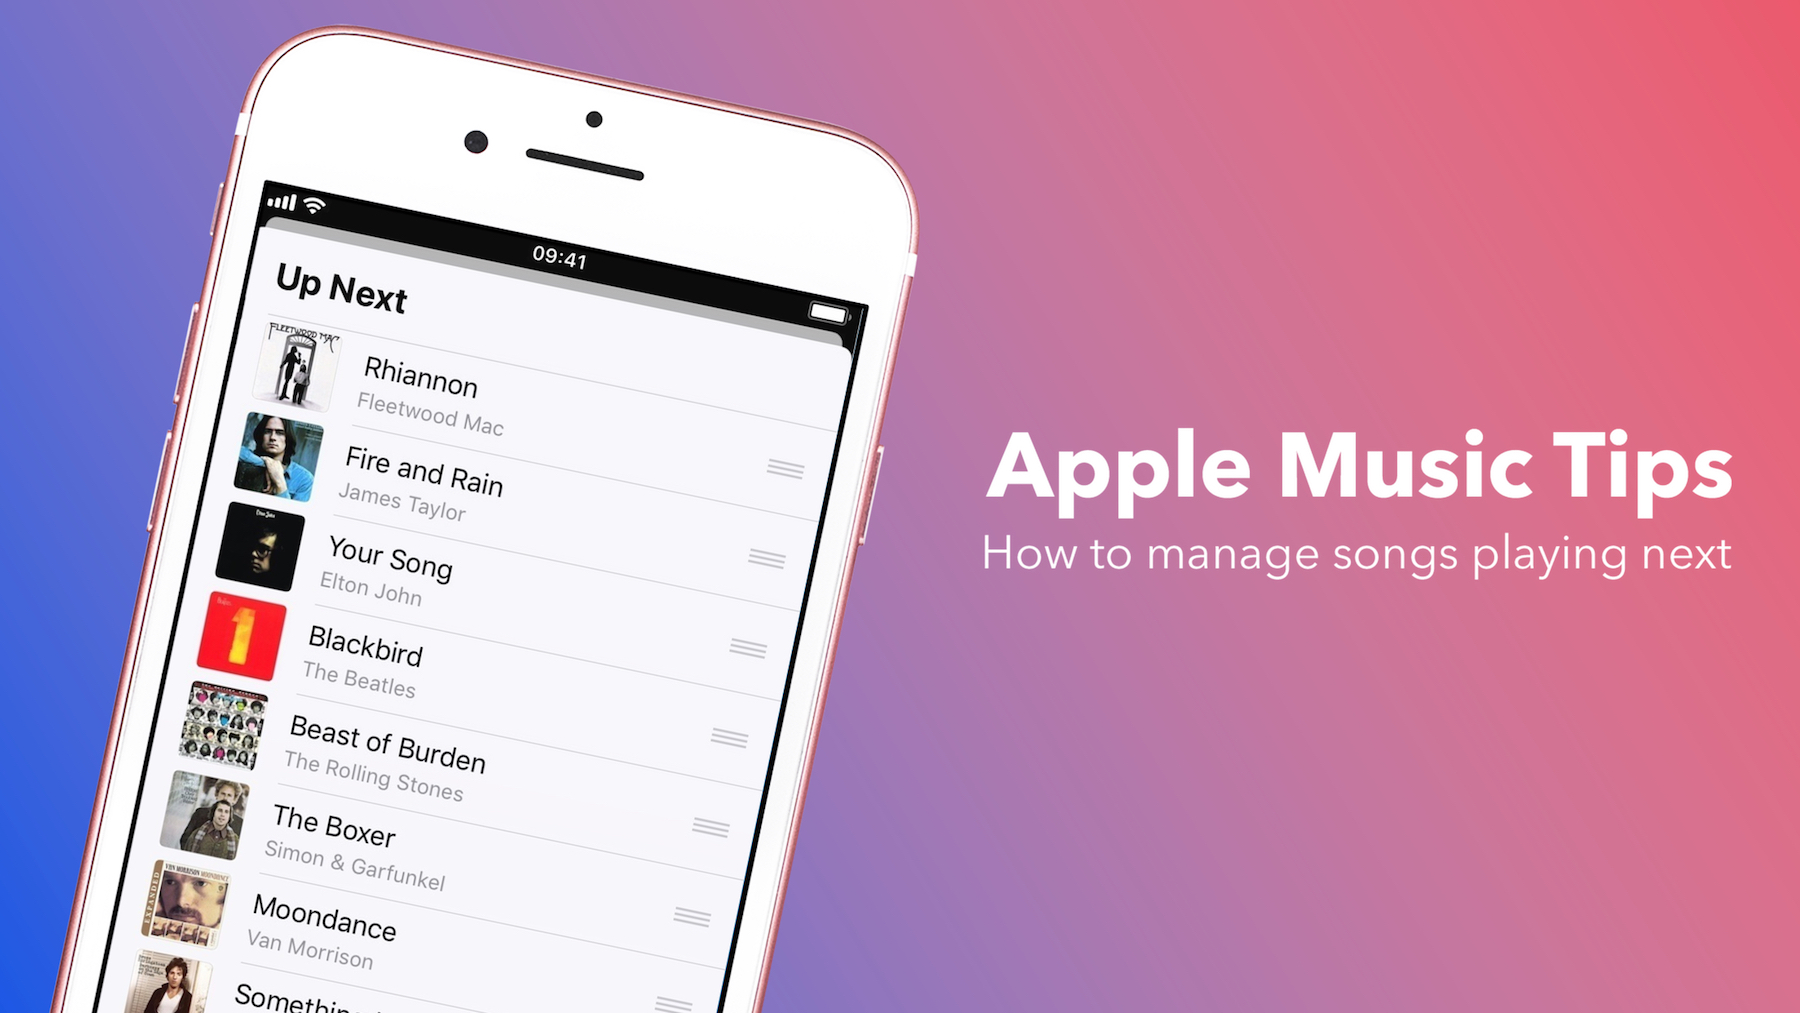 Manage songs playing next in Apple Music